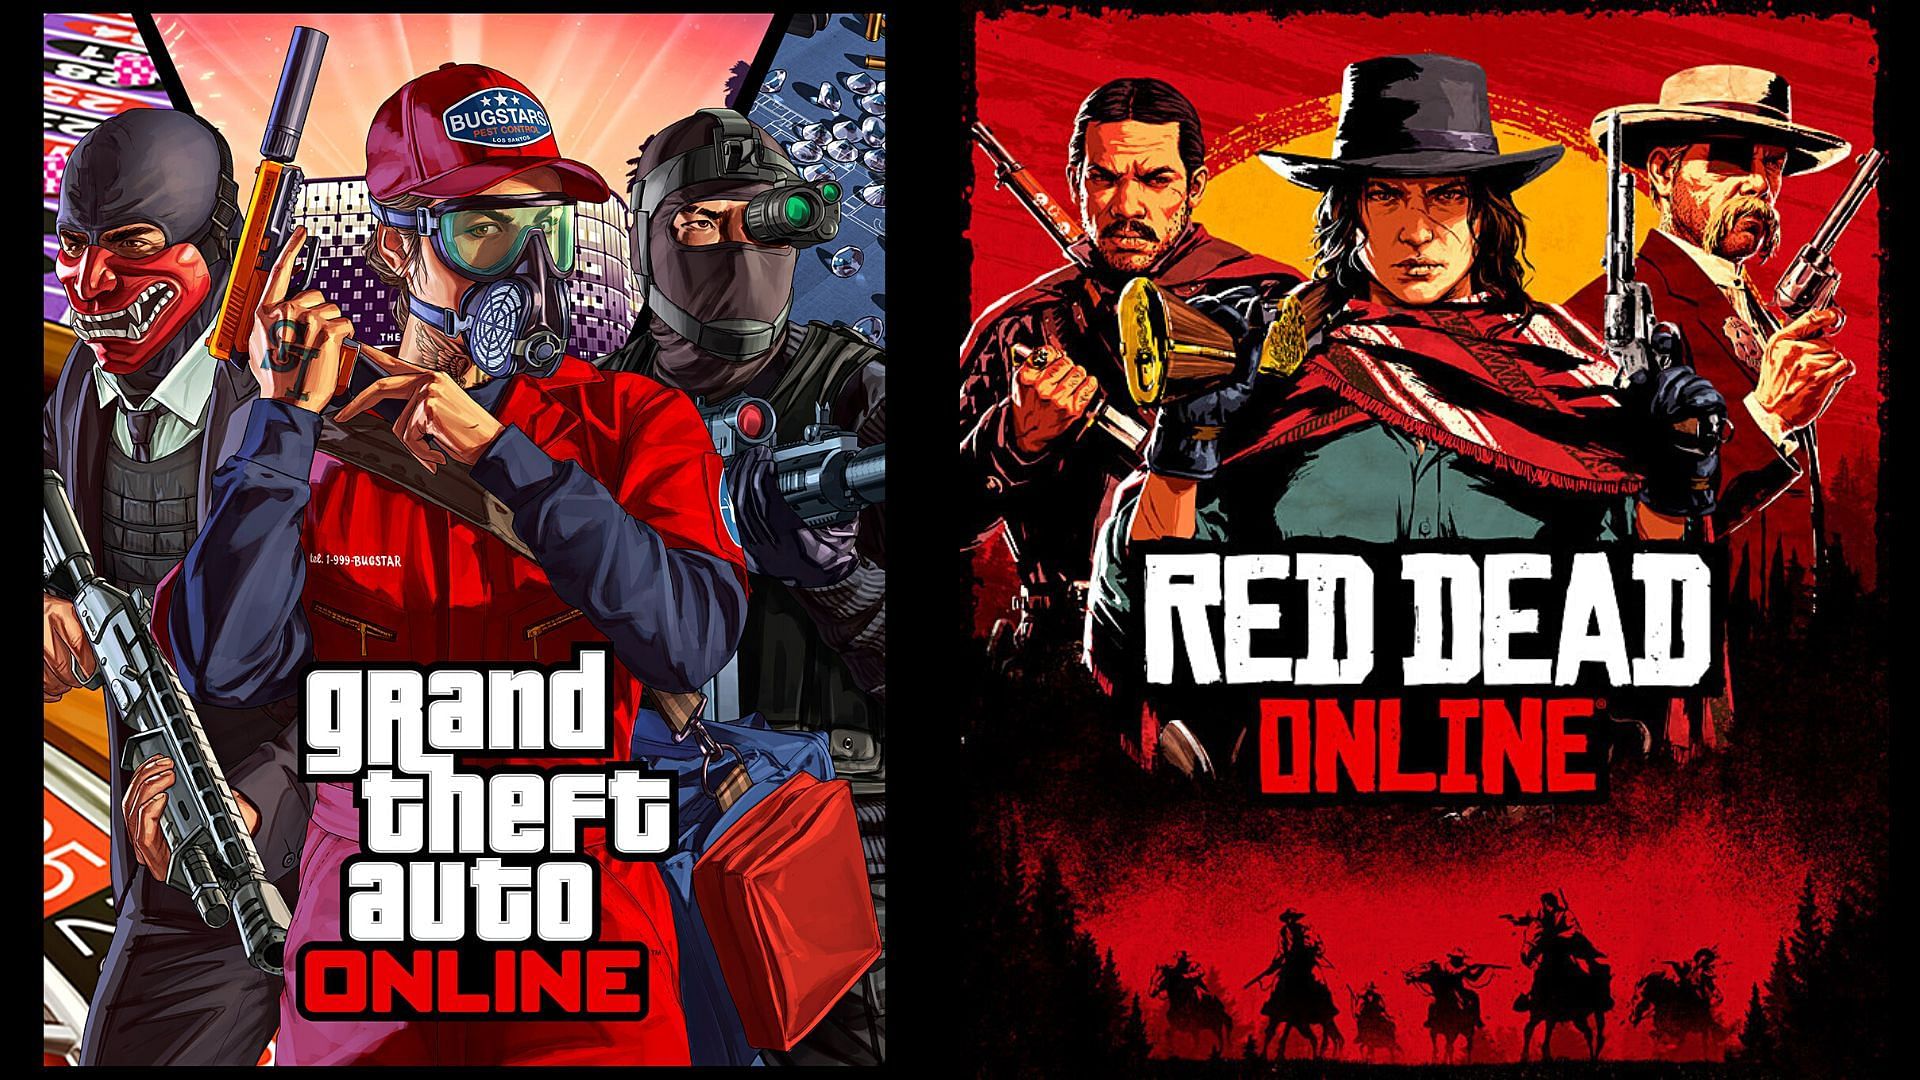 Listing some of GTA Online and Red Dead Redemption Online